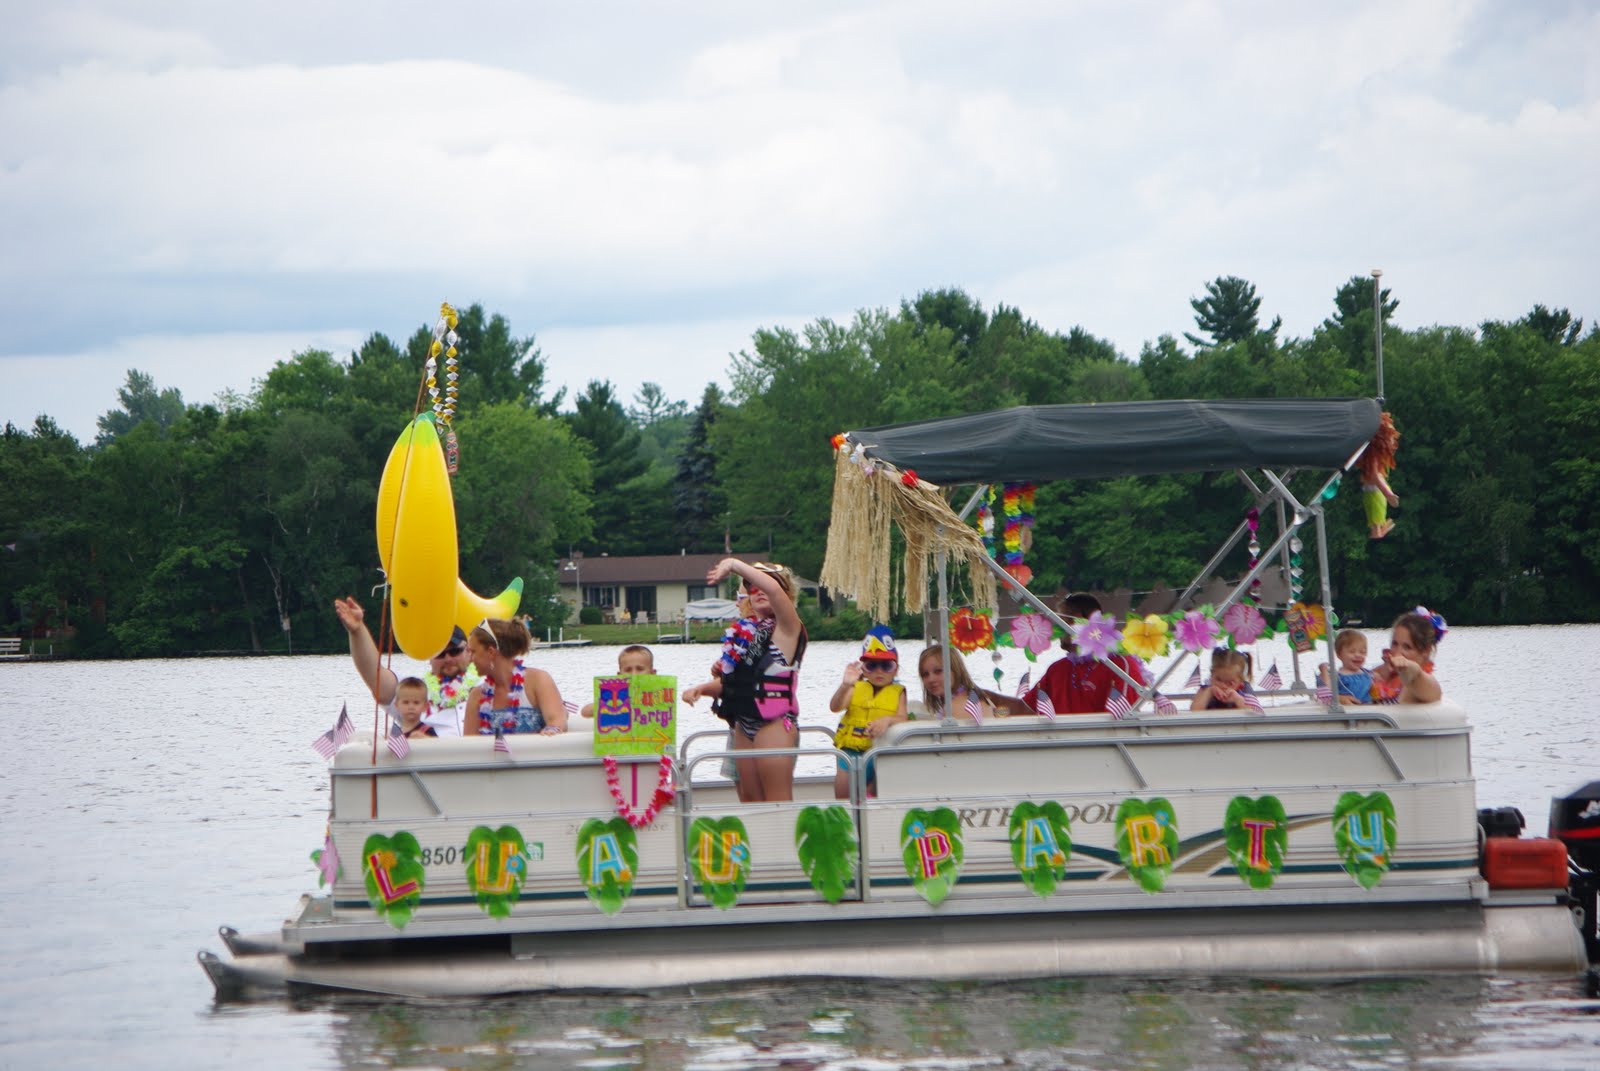  pontoon/boat parade around the lake and a prize for the best